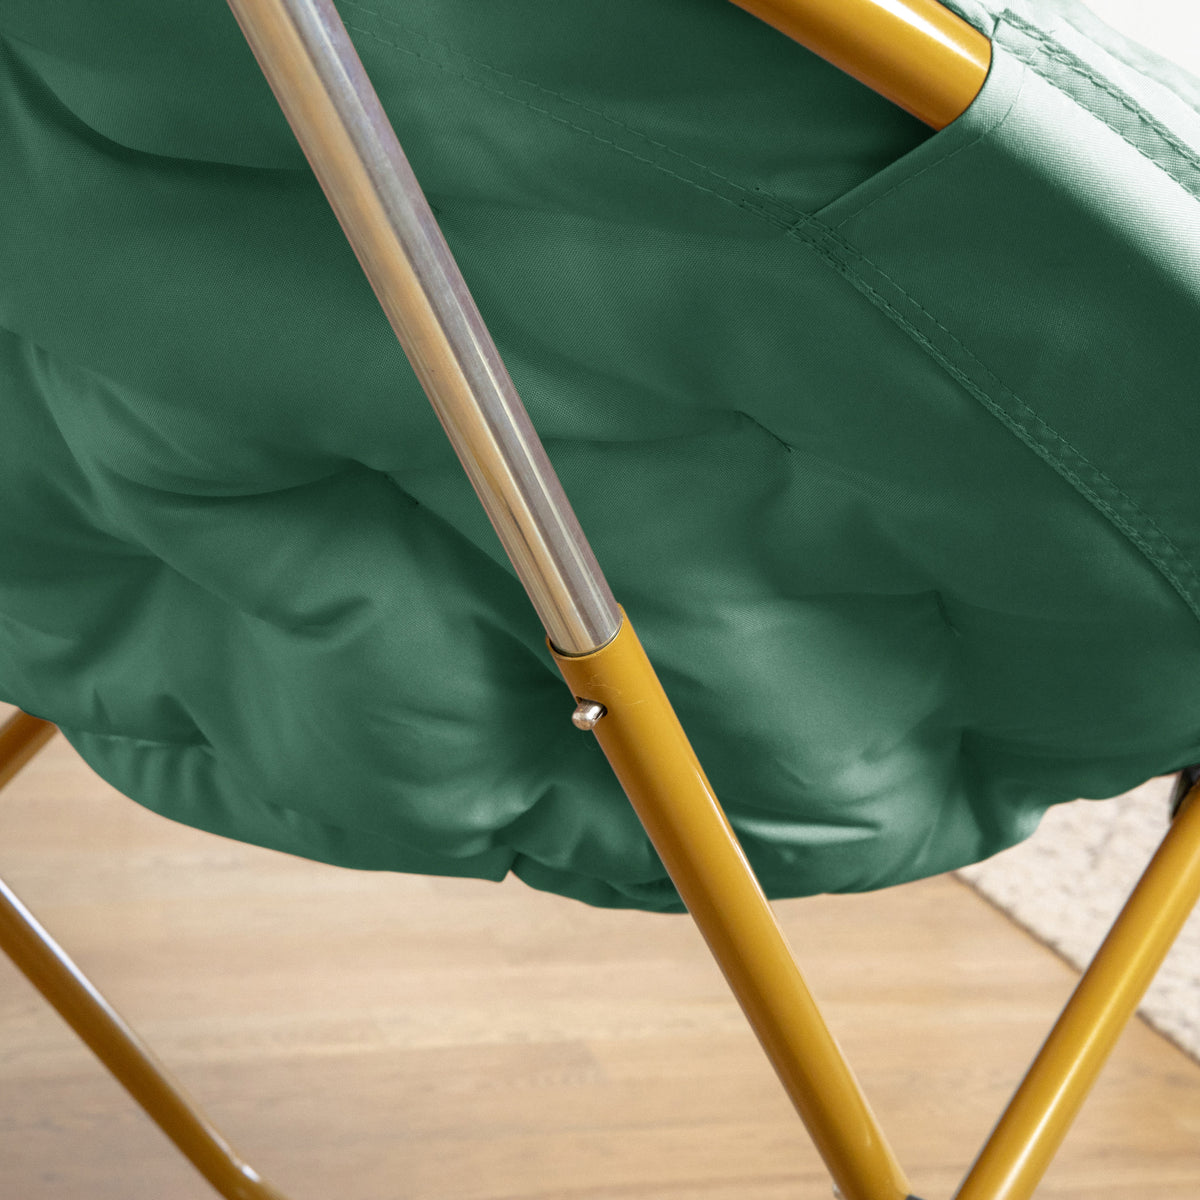 Emerald Fabric/ Soft Gold Frame |#| Folding XL Faux Fur Saucer Chair for Dorm or Bedroom - Emerald/Soft Gold